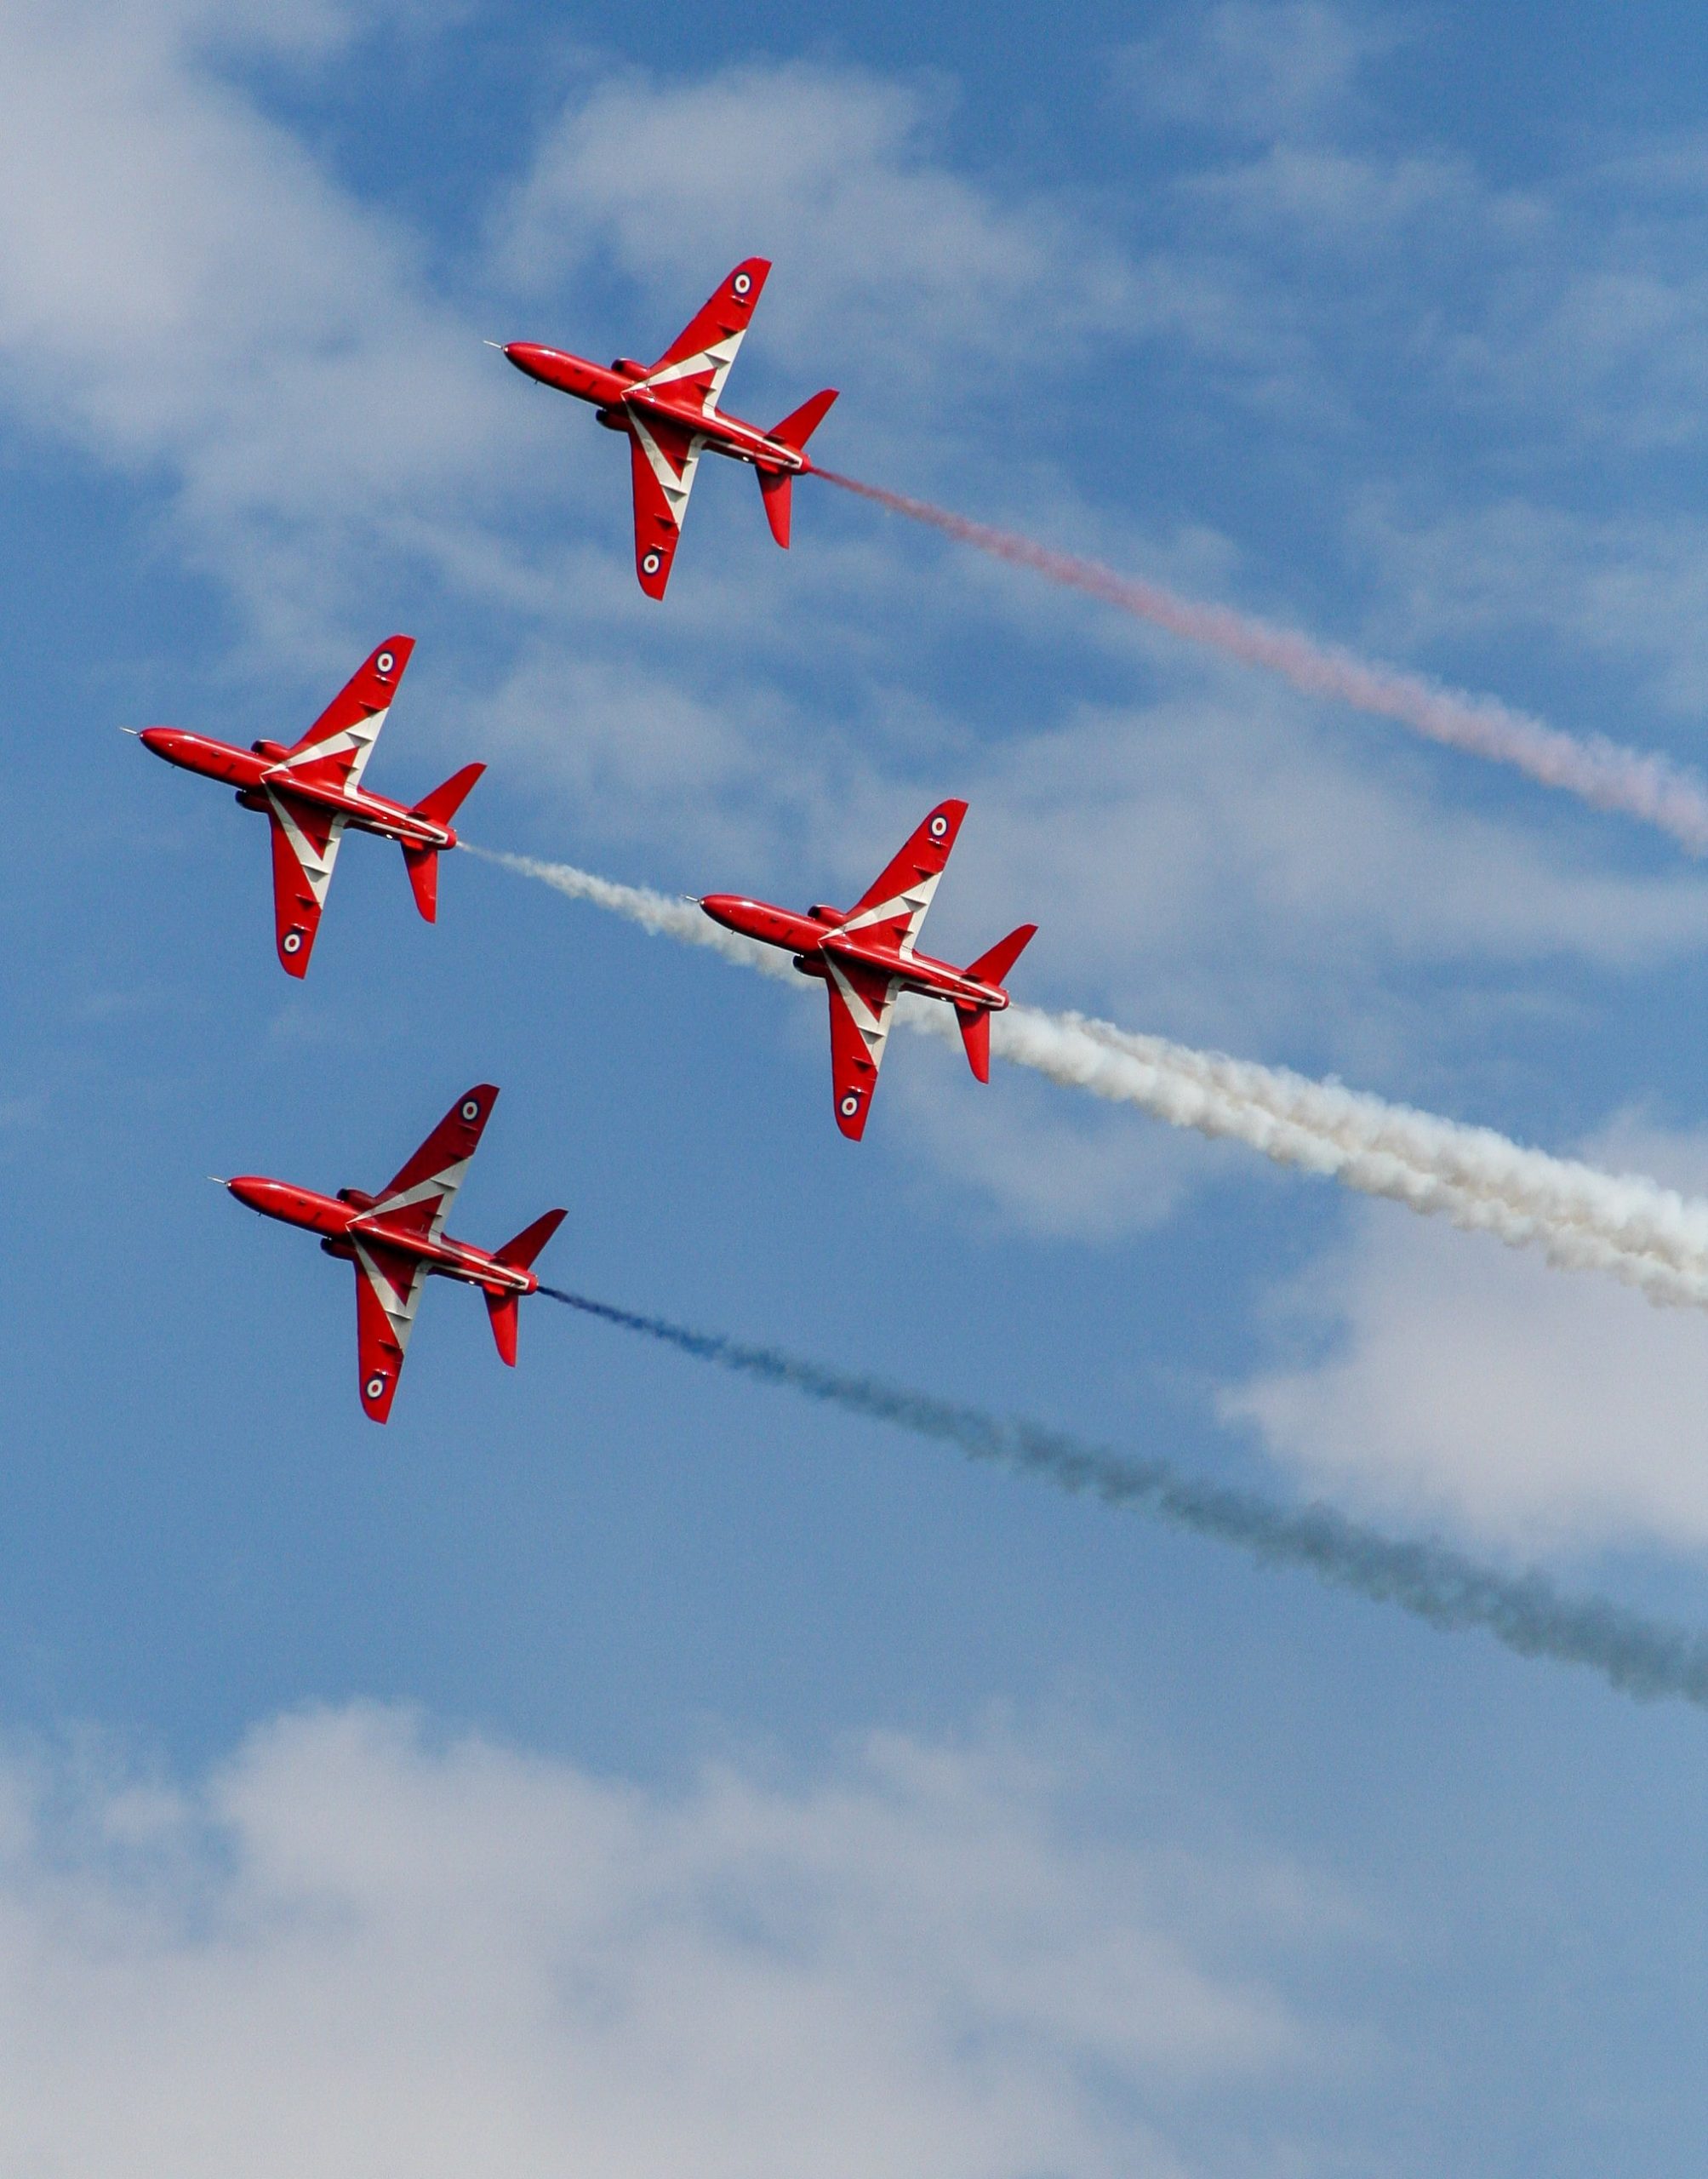 The Red Arrows flying during an air show